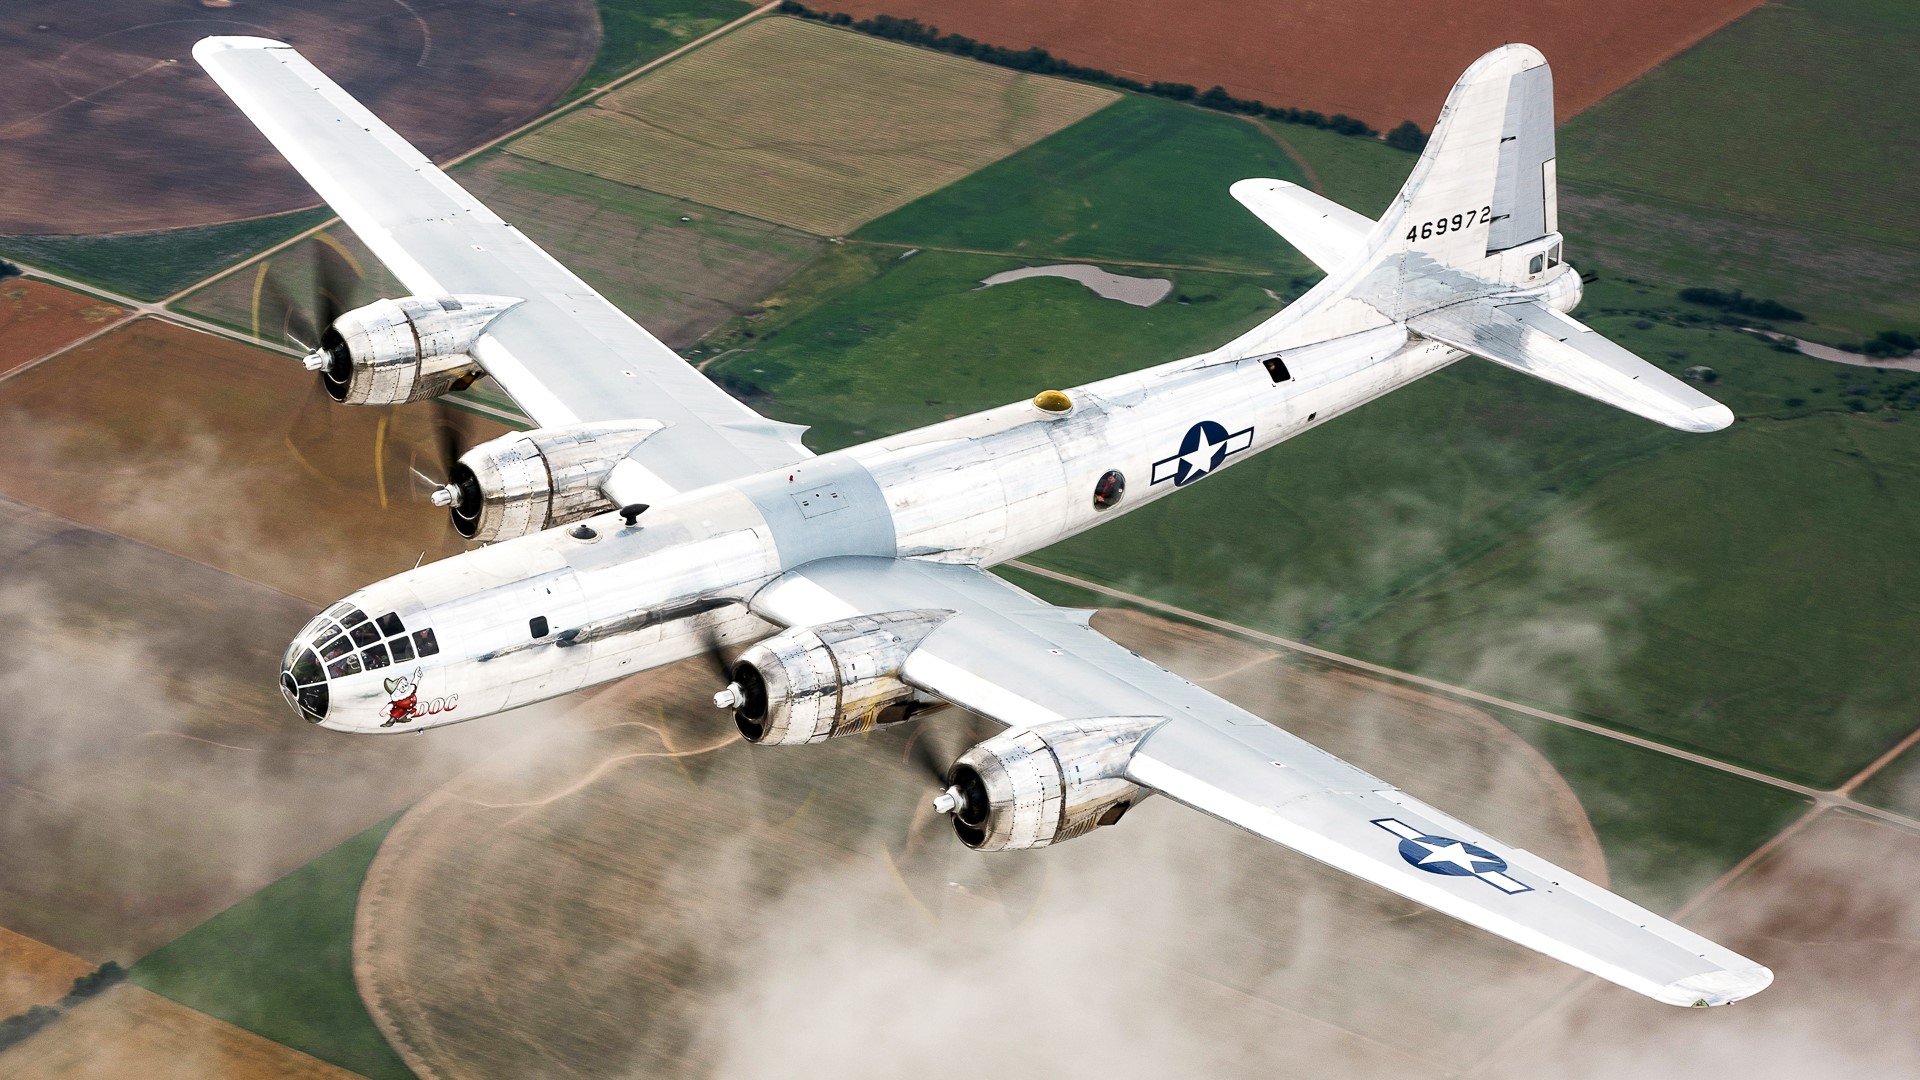 Doc, one of only two B-29s that can fly, arrived at the Arkansas Air and Military Museum for a three-day tour stop.